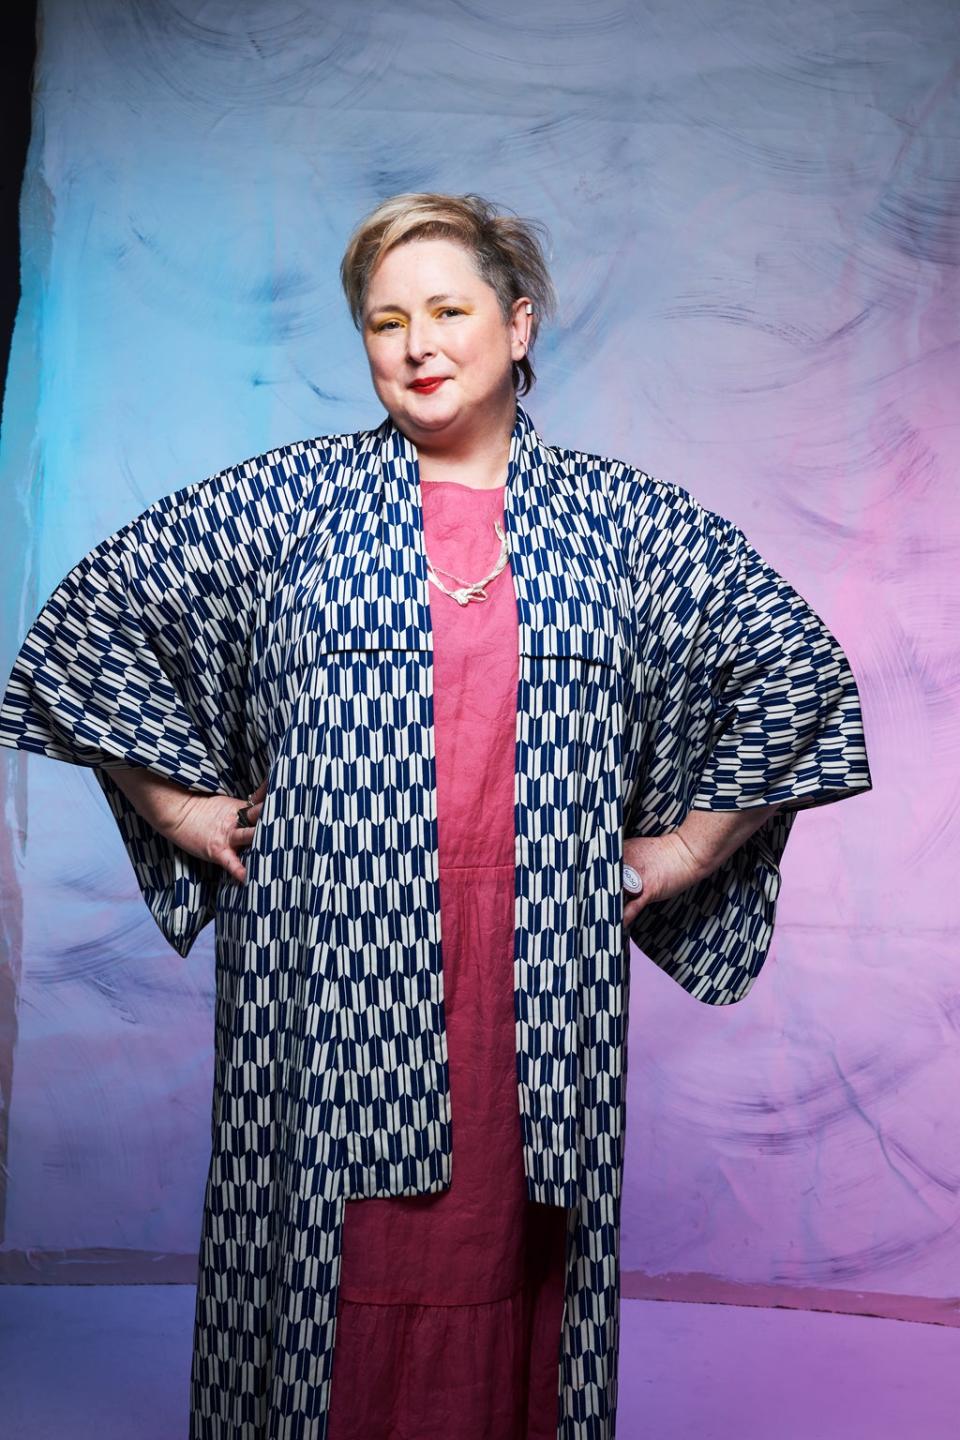 McSweeney is best known for her role as Sister Michael in Derry Girls (PHOTOGRAPHY NATASHA PSZENICKI)